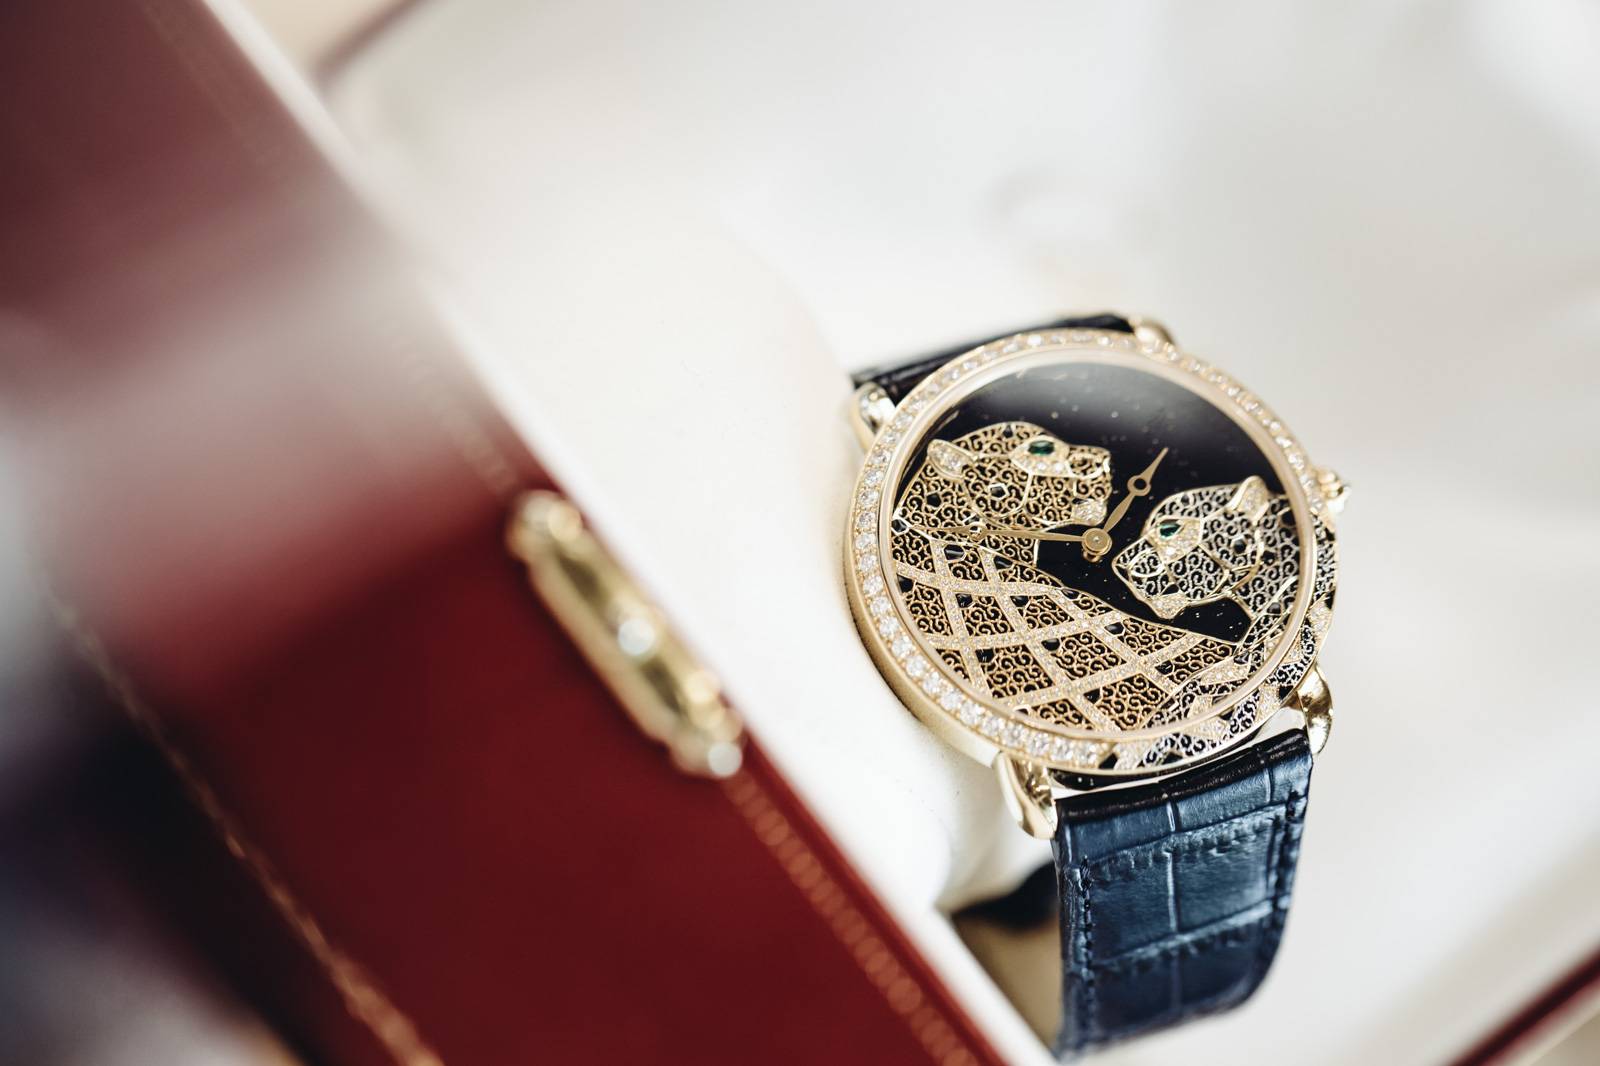 Hands-On The Cartier Ronde Louis Cartier Filigree Panthers Motif Watch